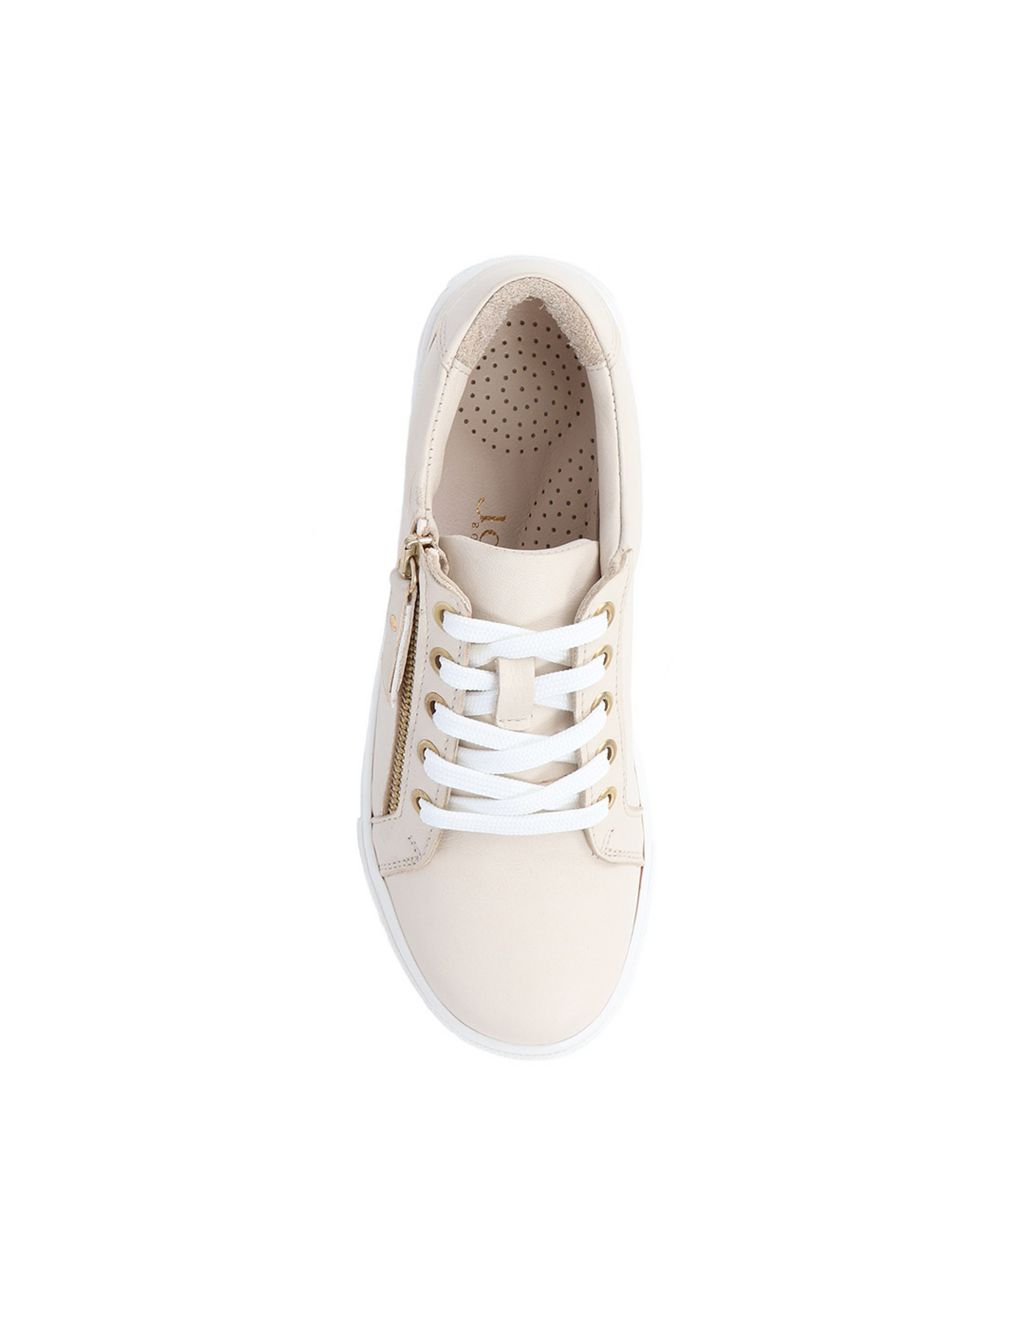 Leather Zip Up Trainers image 4